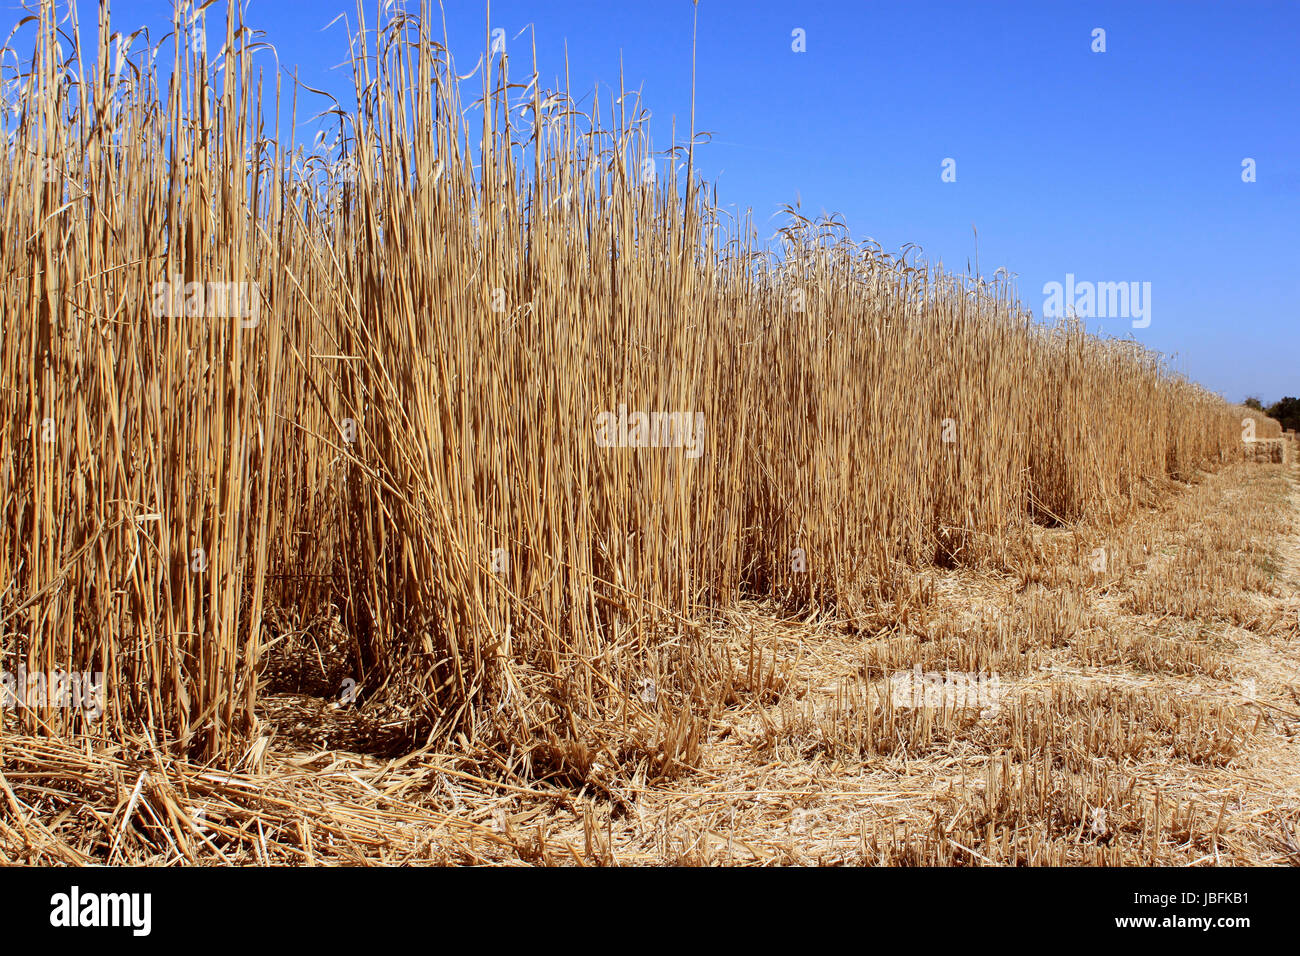 an agricultural field for an organic farming for the harvest of the reed on a bottom of blue sky Stock Photo